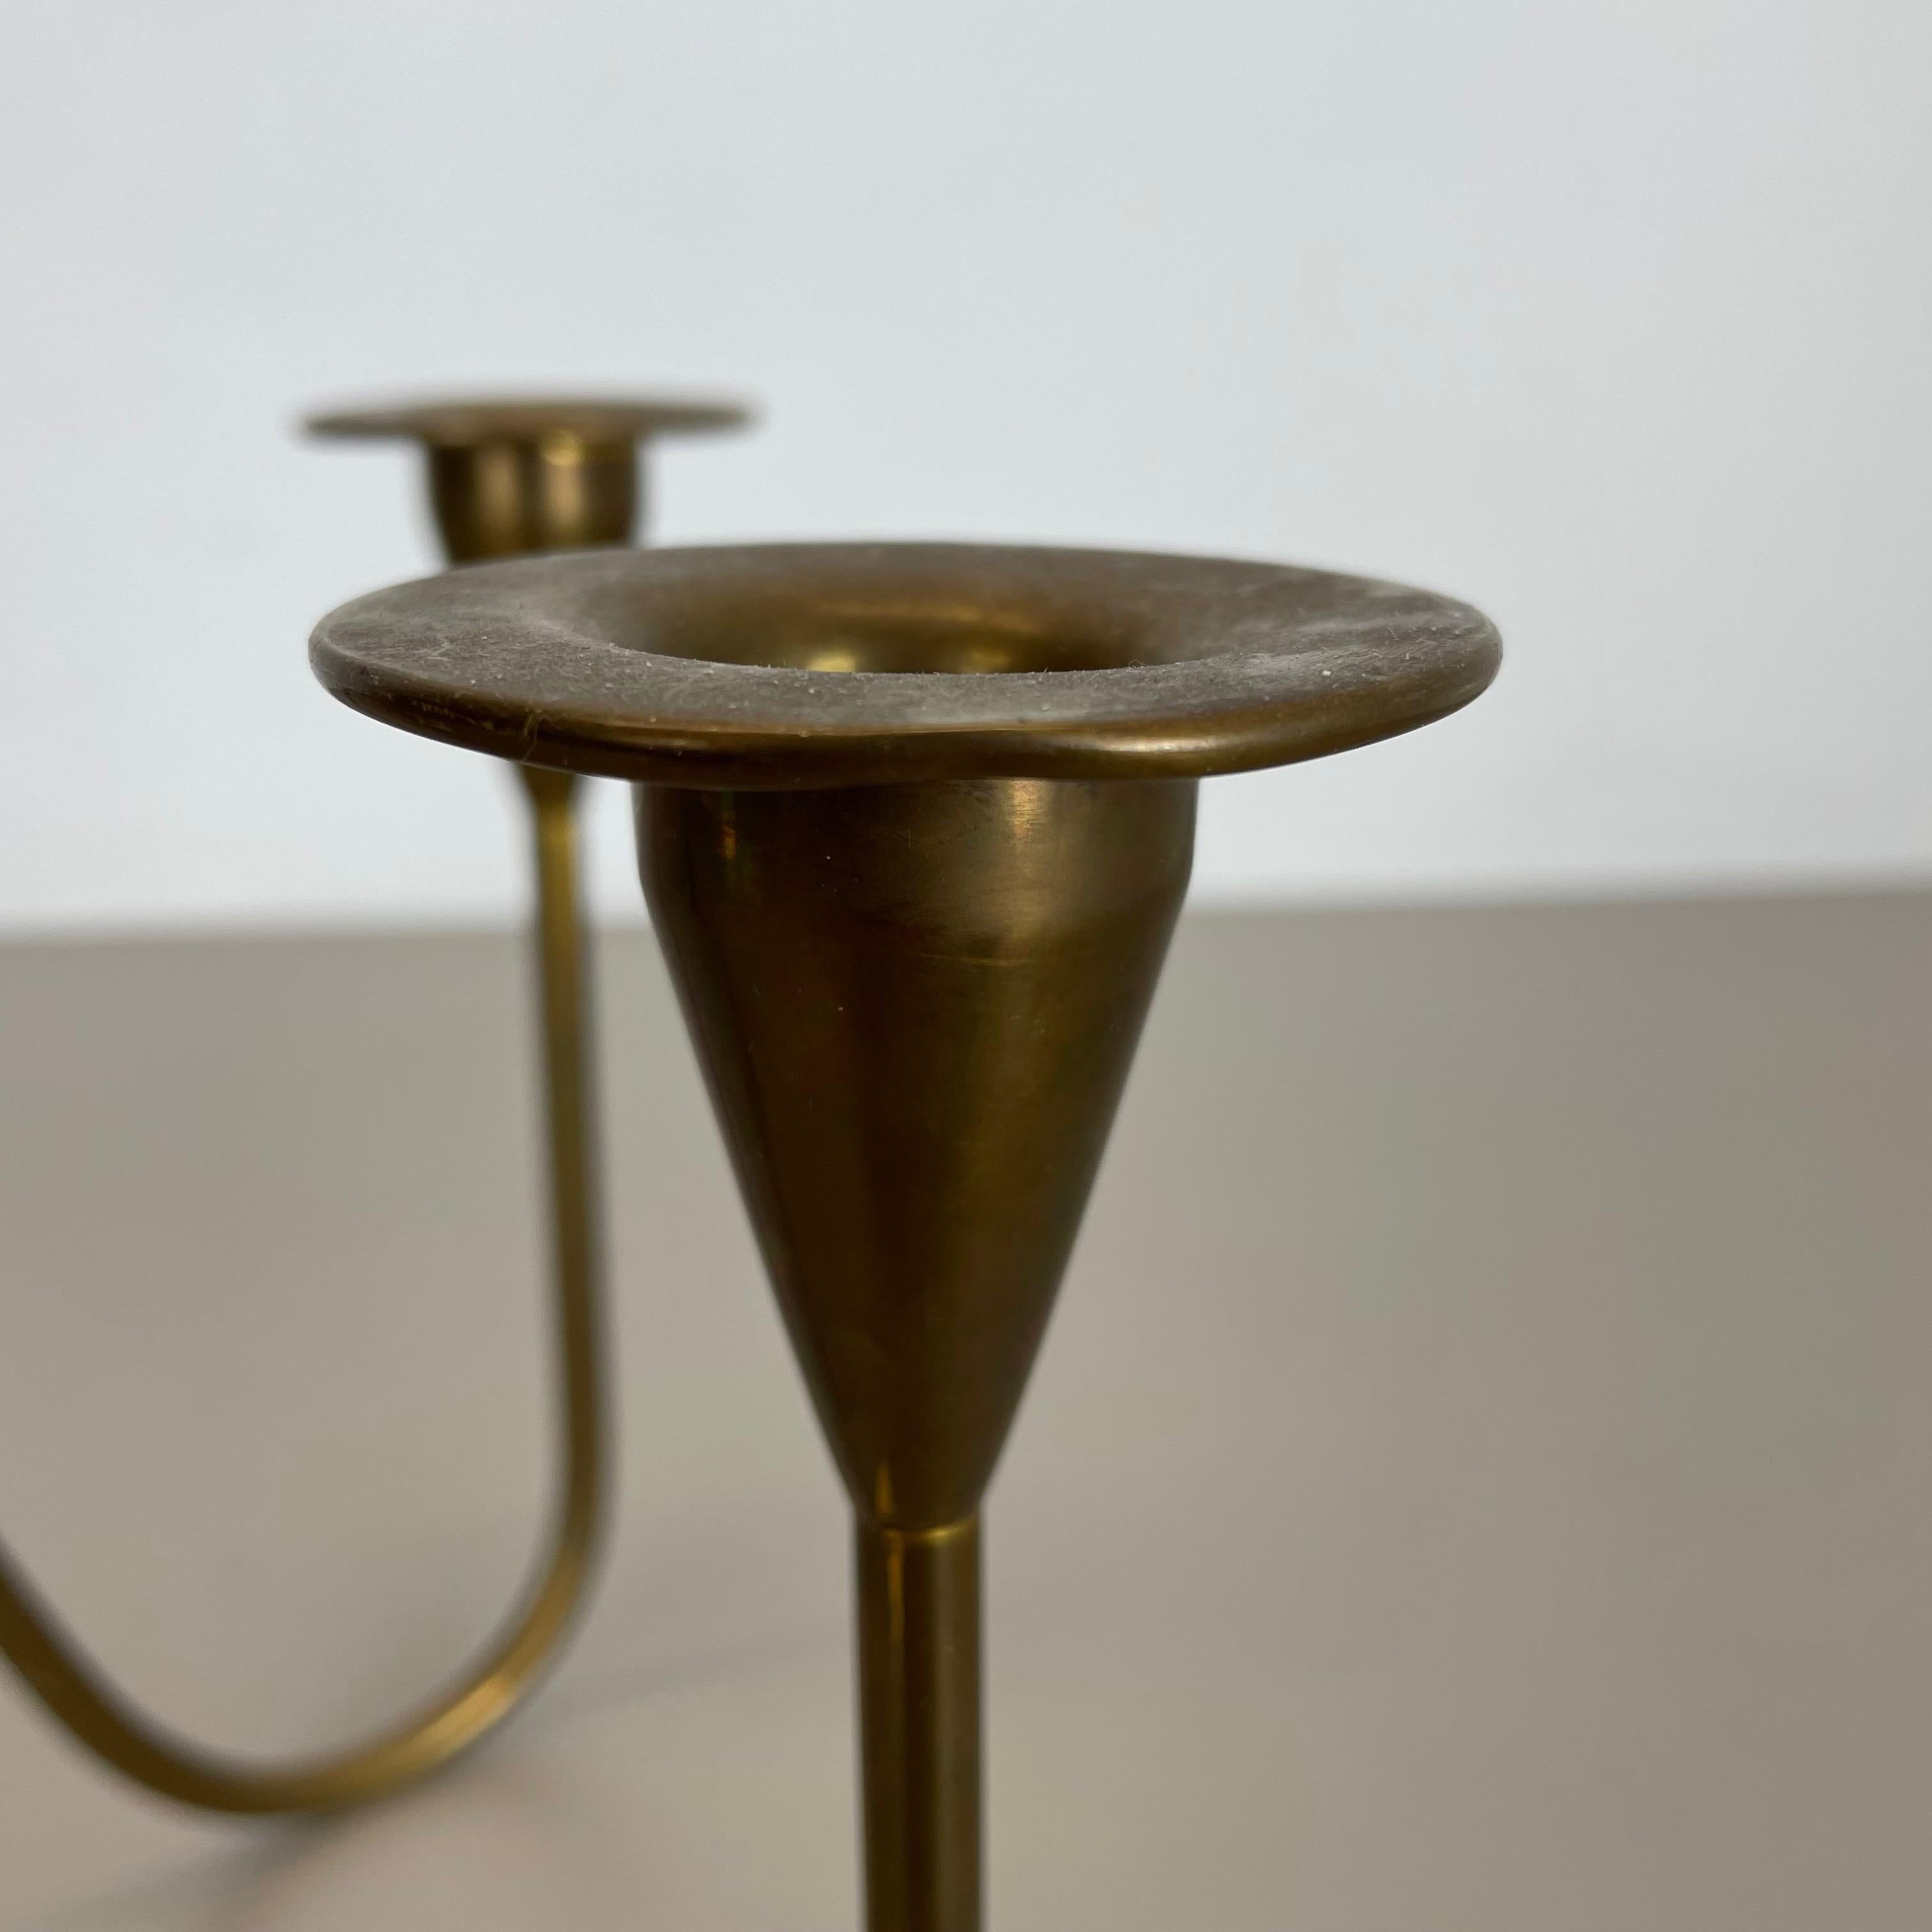 Sculptural Brass Candleholder Object by Günter Kupetz for WMF, Germany 1950s For Sale 7